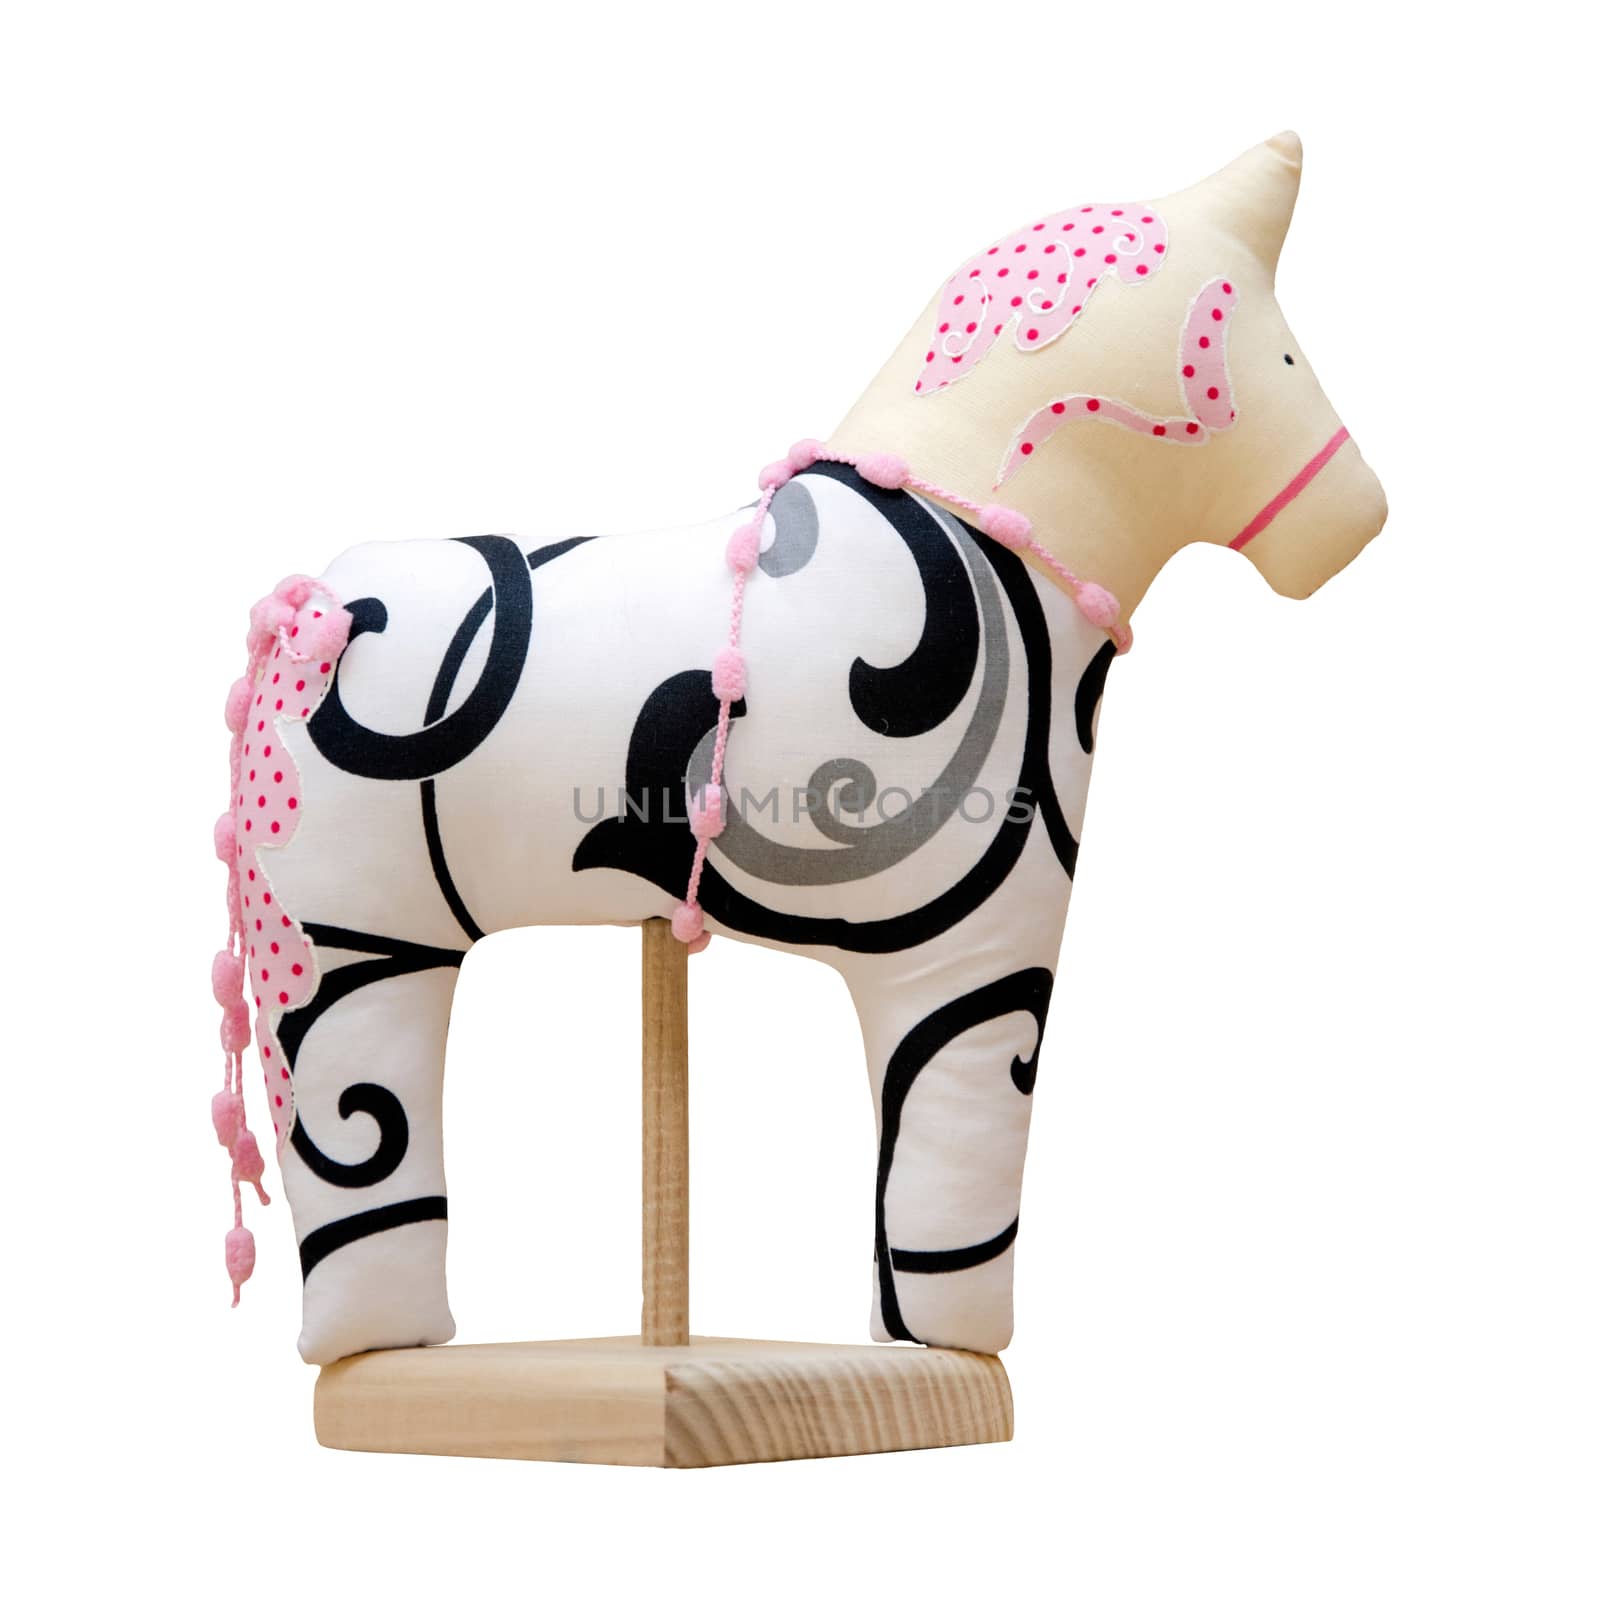 The Hand made soft toy horse isolated on white with pink on the stand